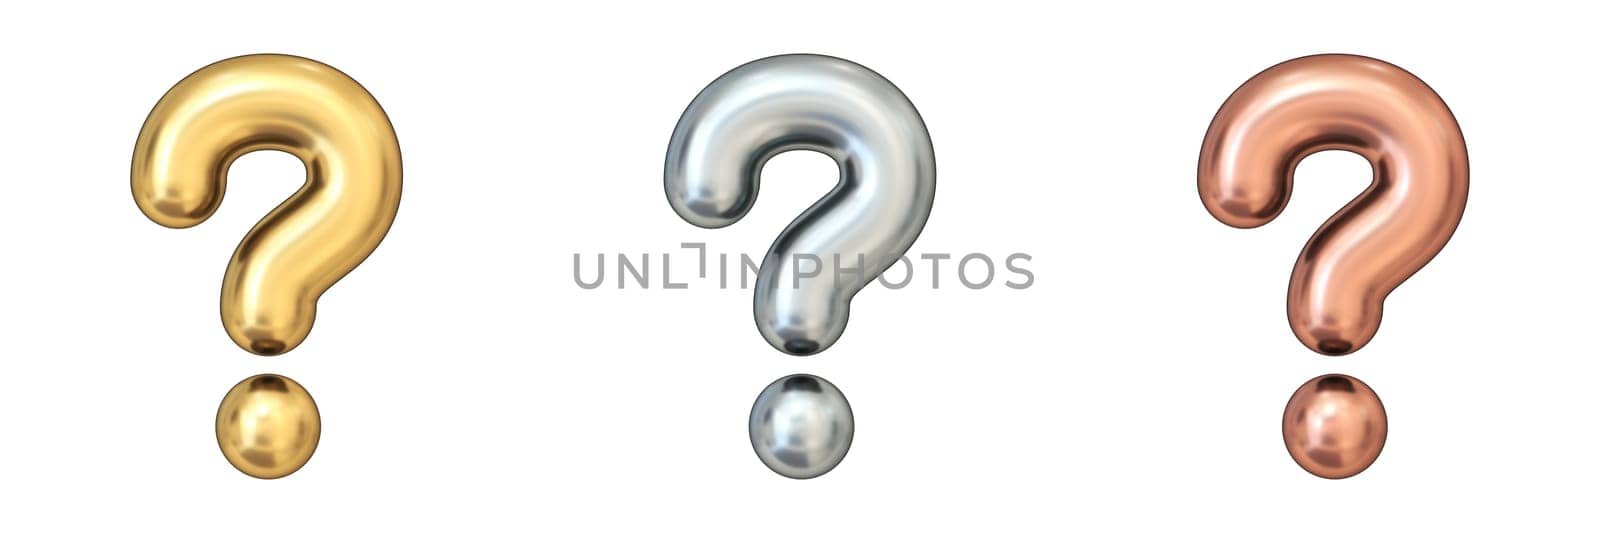 Gold, silver and bronze question marks 3D rendering illustration isolated on white background